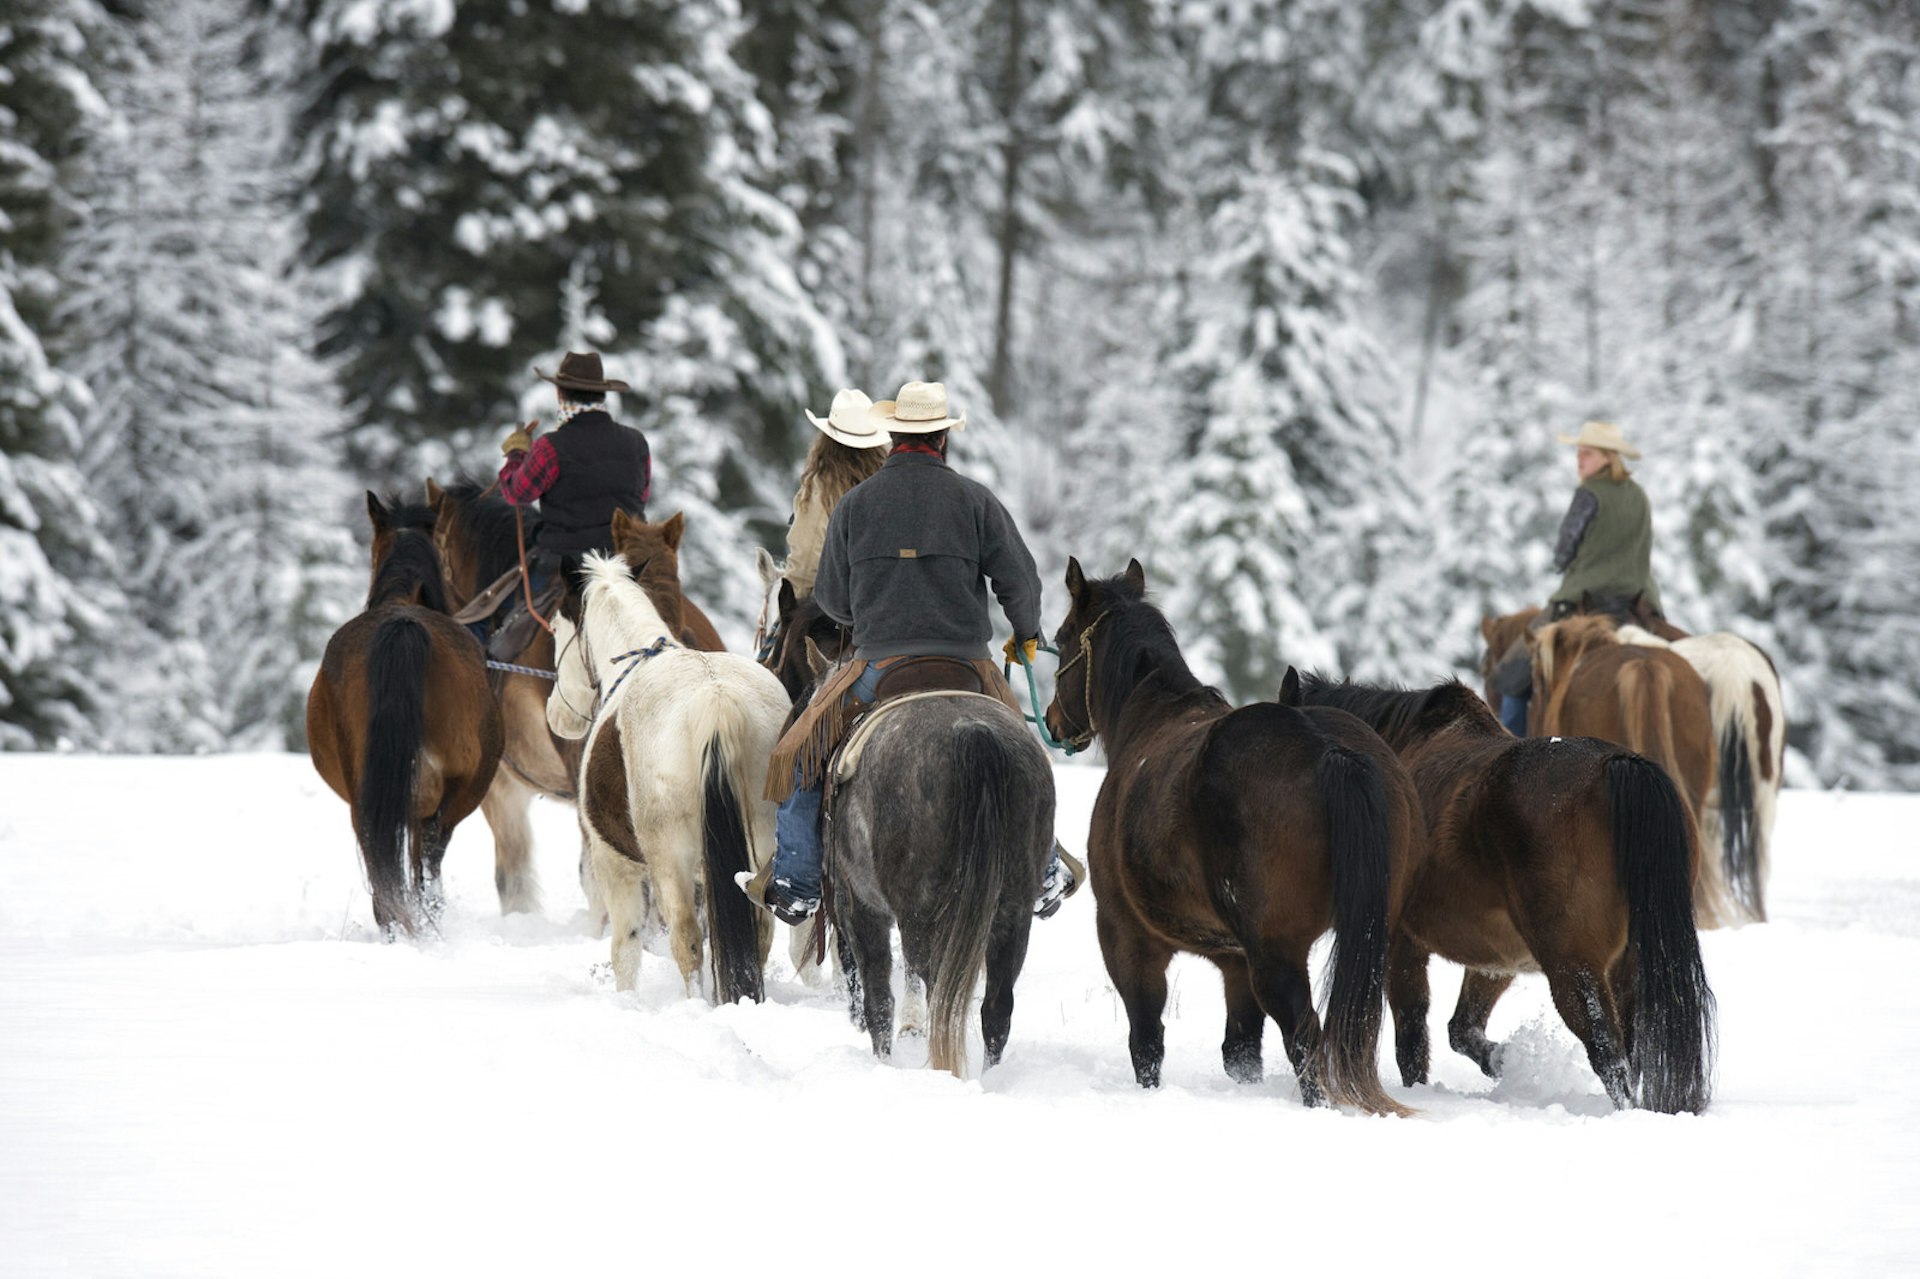 Practice your Wild West skills at a Montana ranch © Kathleen Reeder Wildlife Photography / Moment / Getty